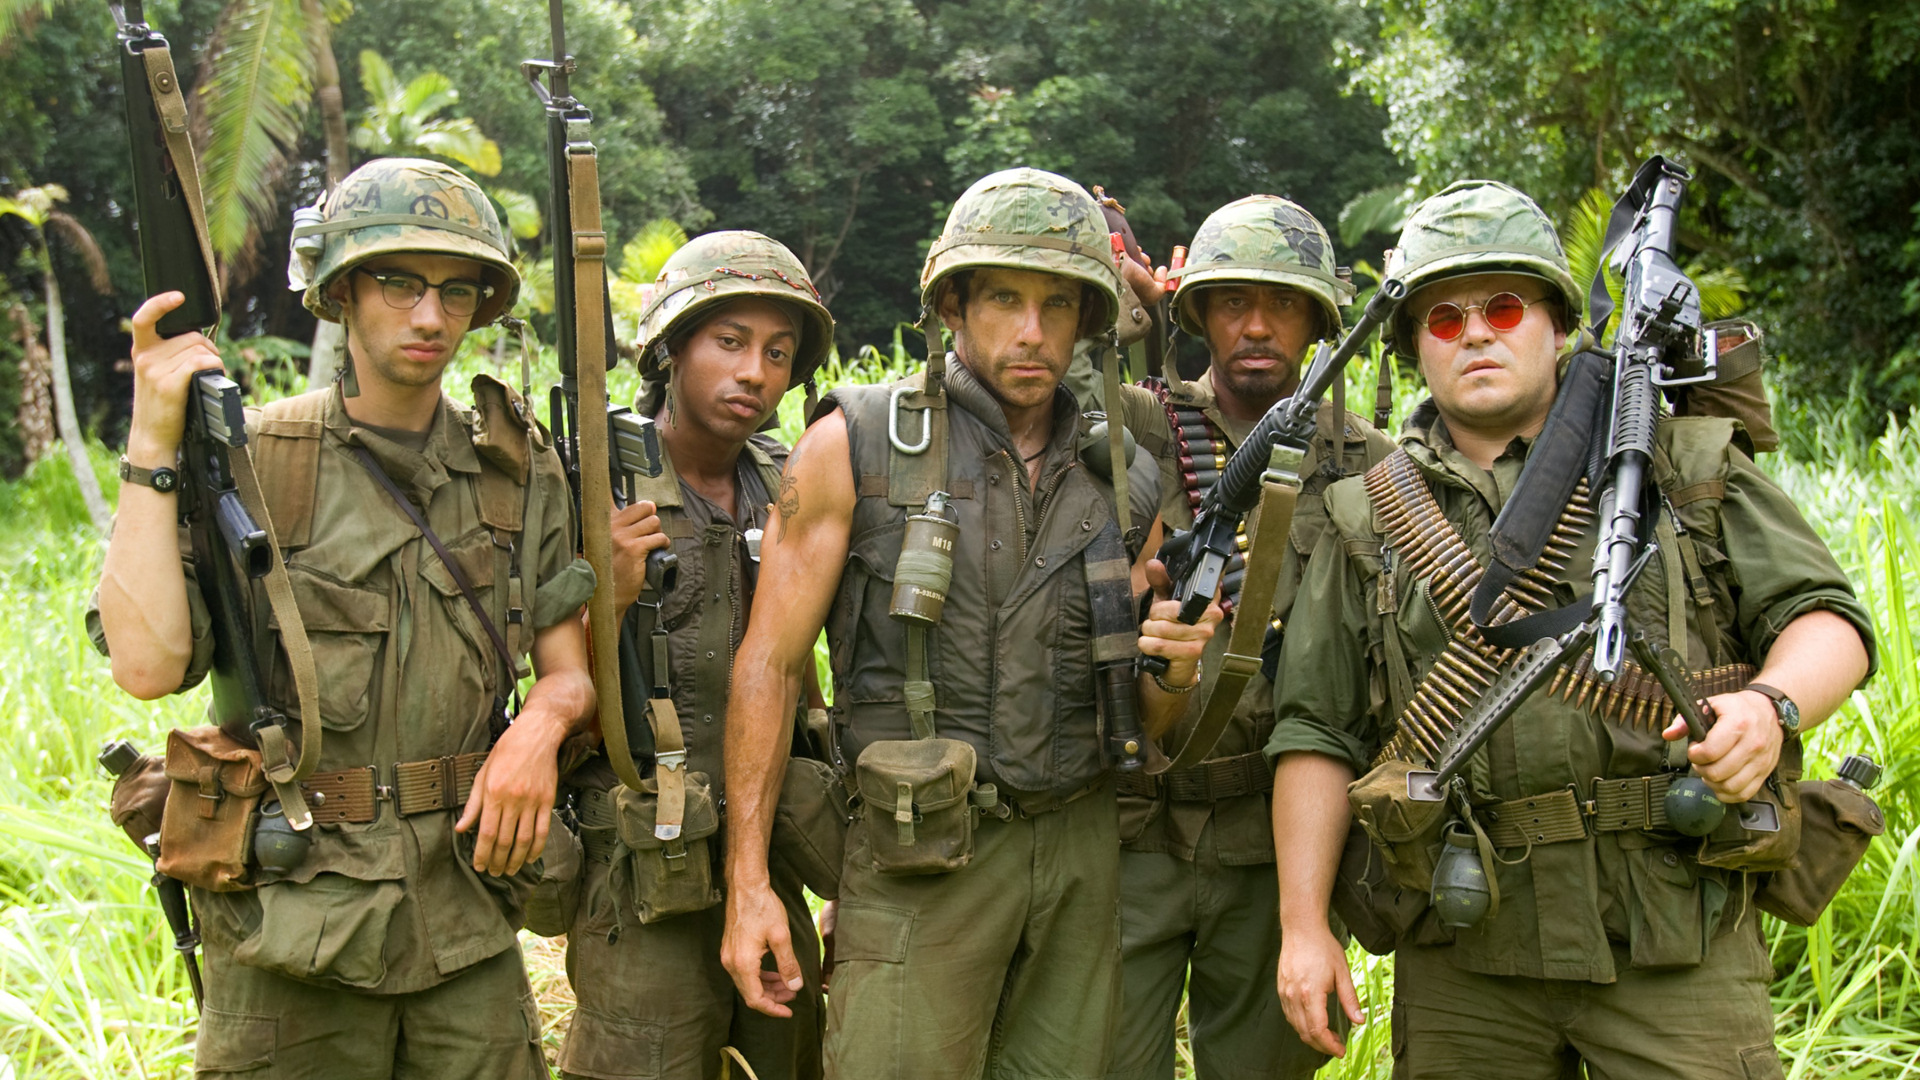 tropic, Thunder, Action, Comedy, Military, Weapon,  38 Wallpaper